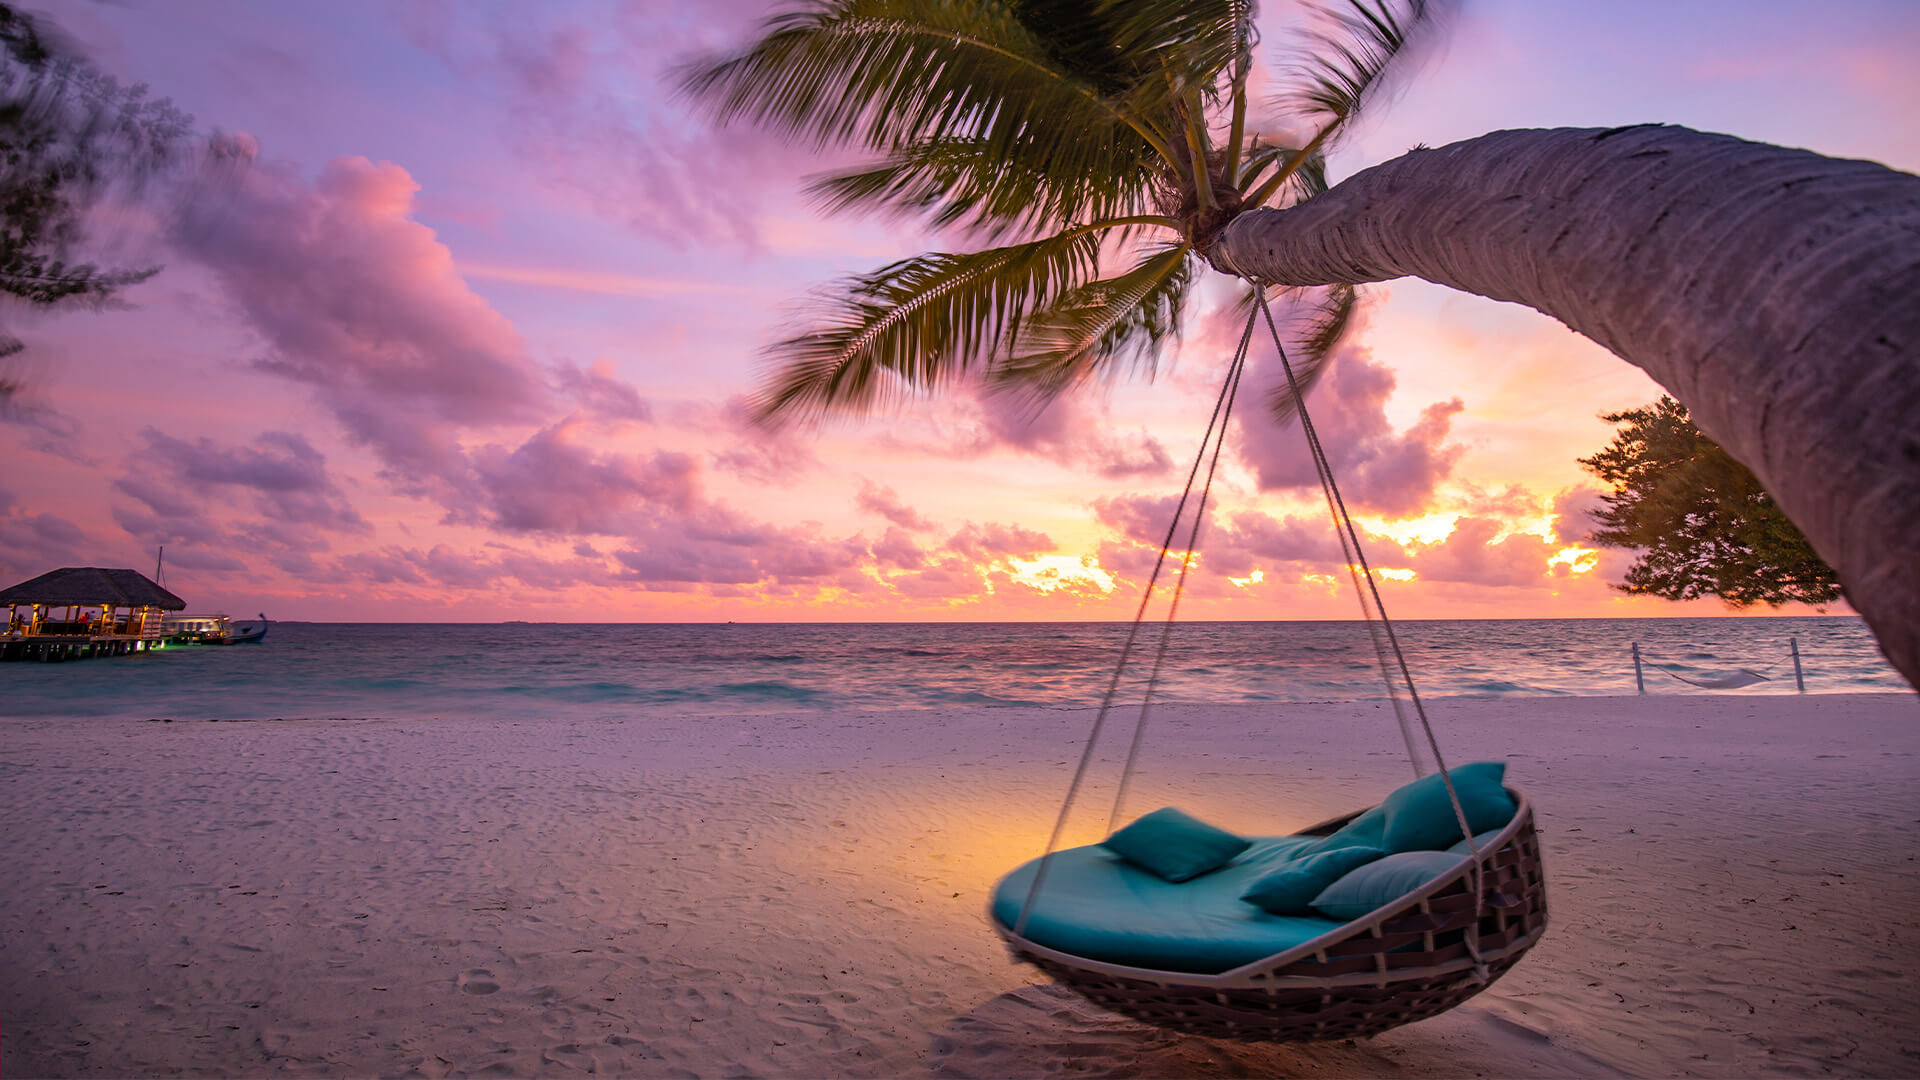 Beach in the Maldives at sunset, with a hamock hanging from a palm tree